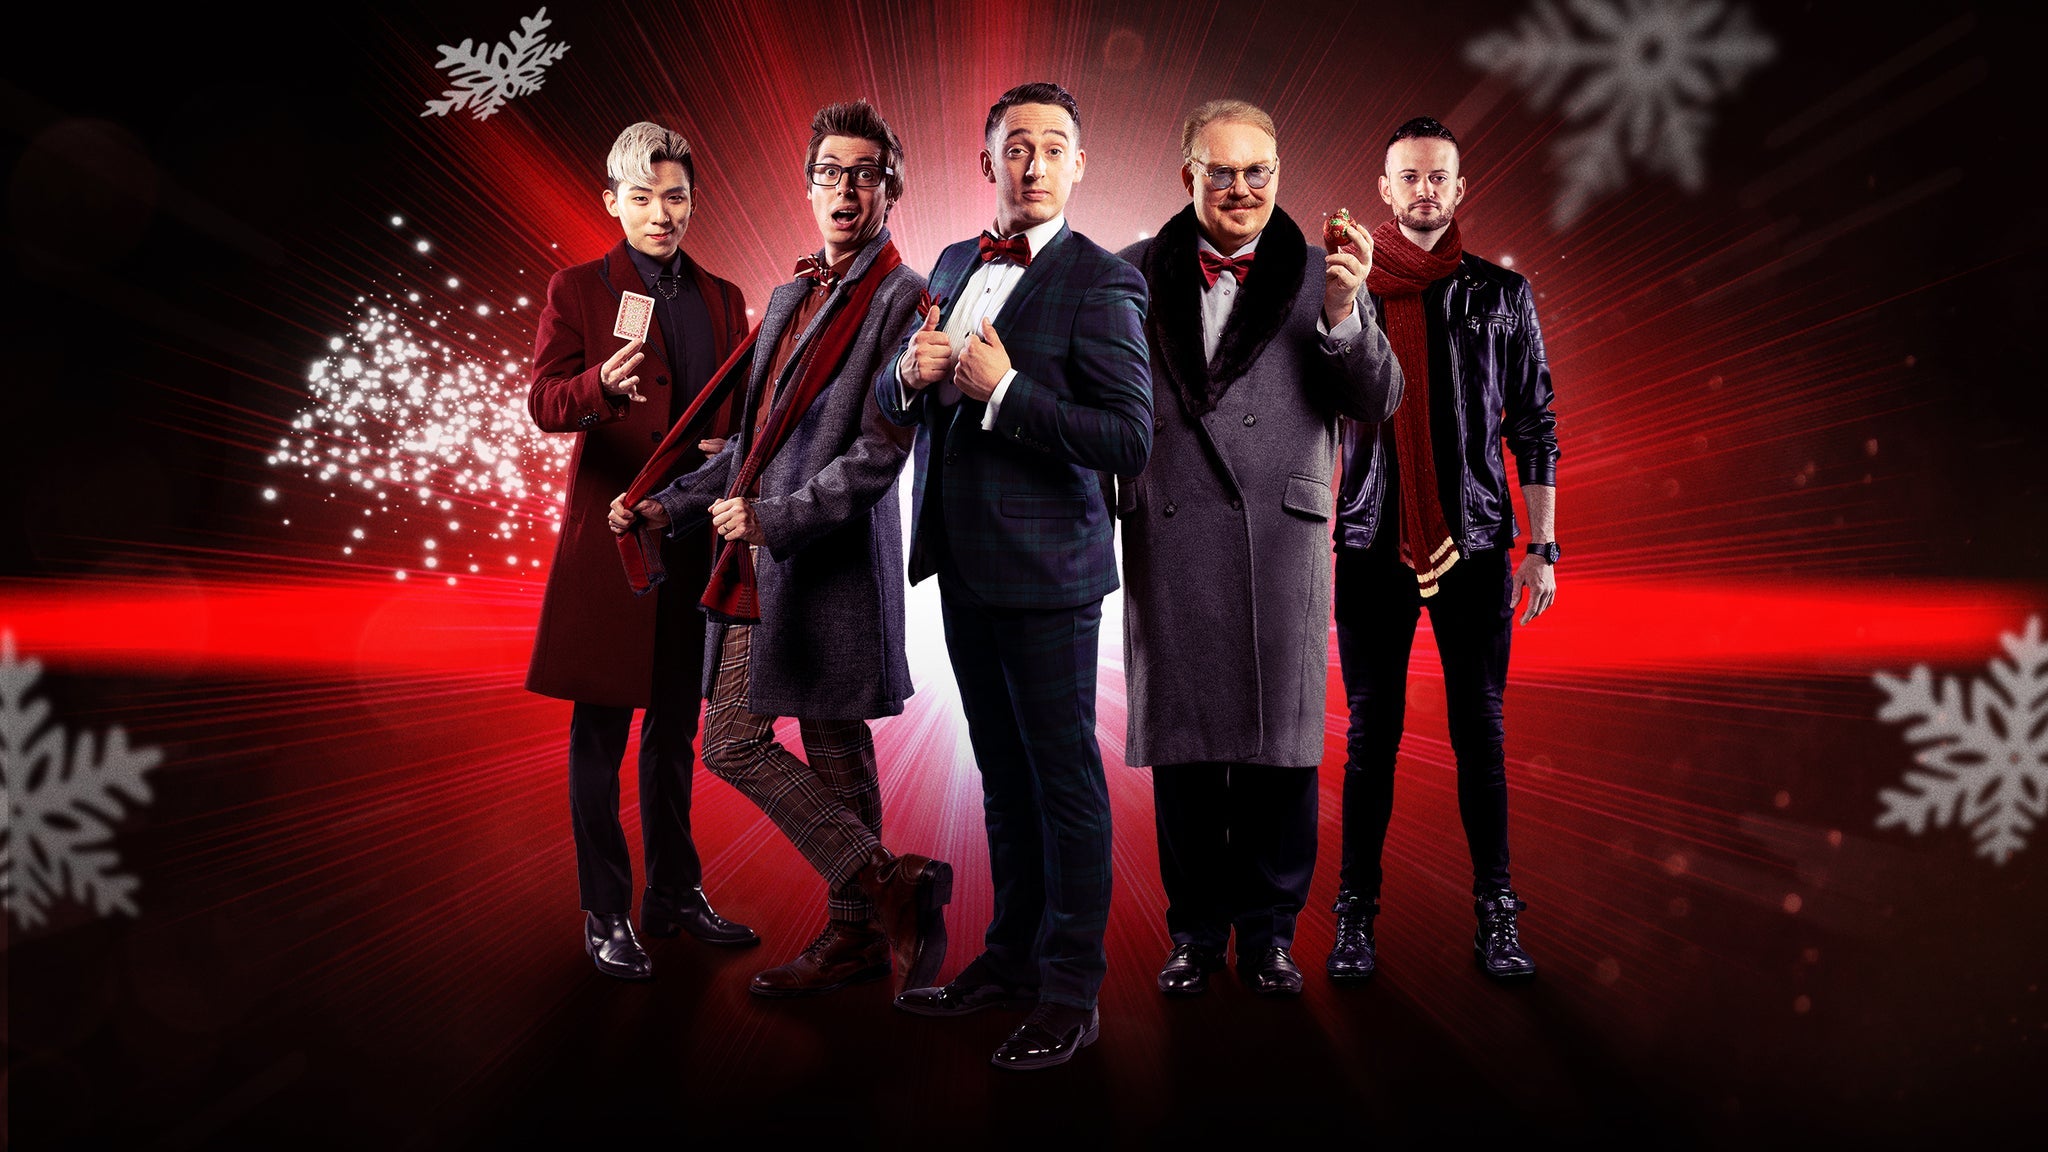 The Illusionists-Magic Of The Holidays pre-sale password for approved tickets in Windsor